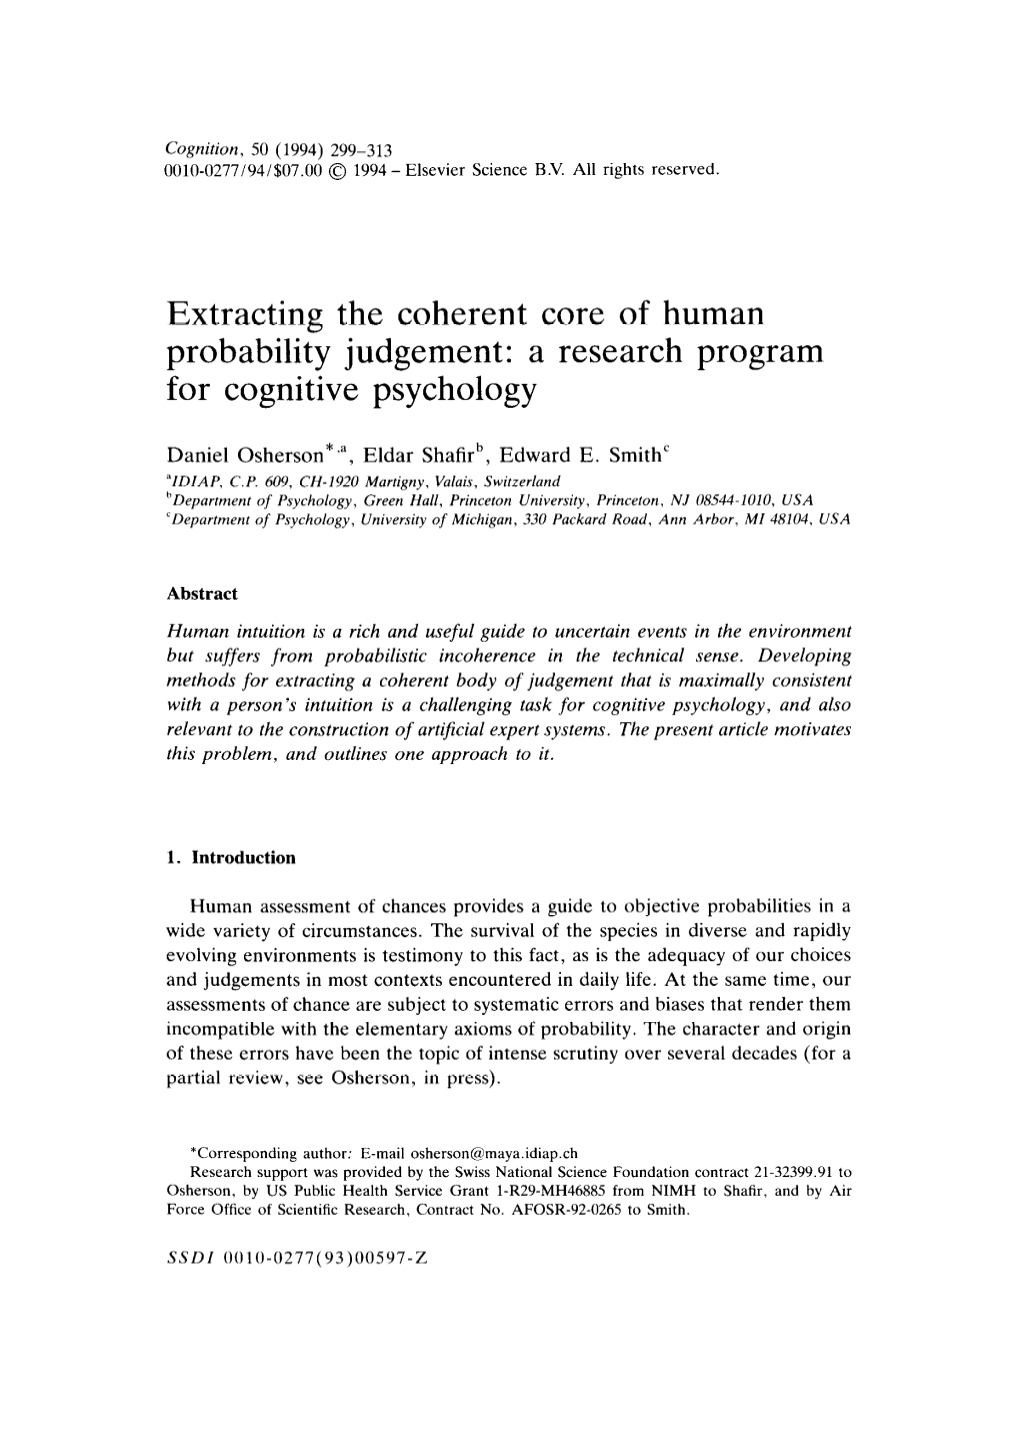 Extracting the Coherent Core of Human Probability Judgement: a Research Program for Cognitive Psychology